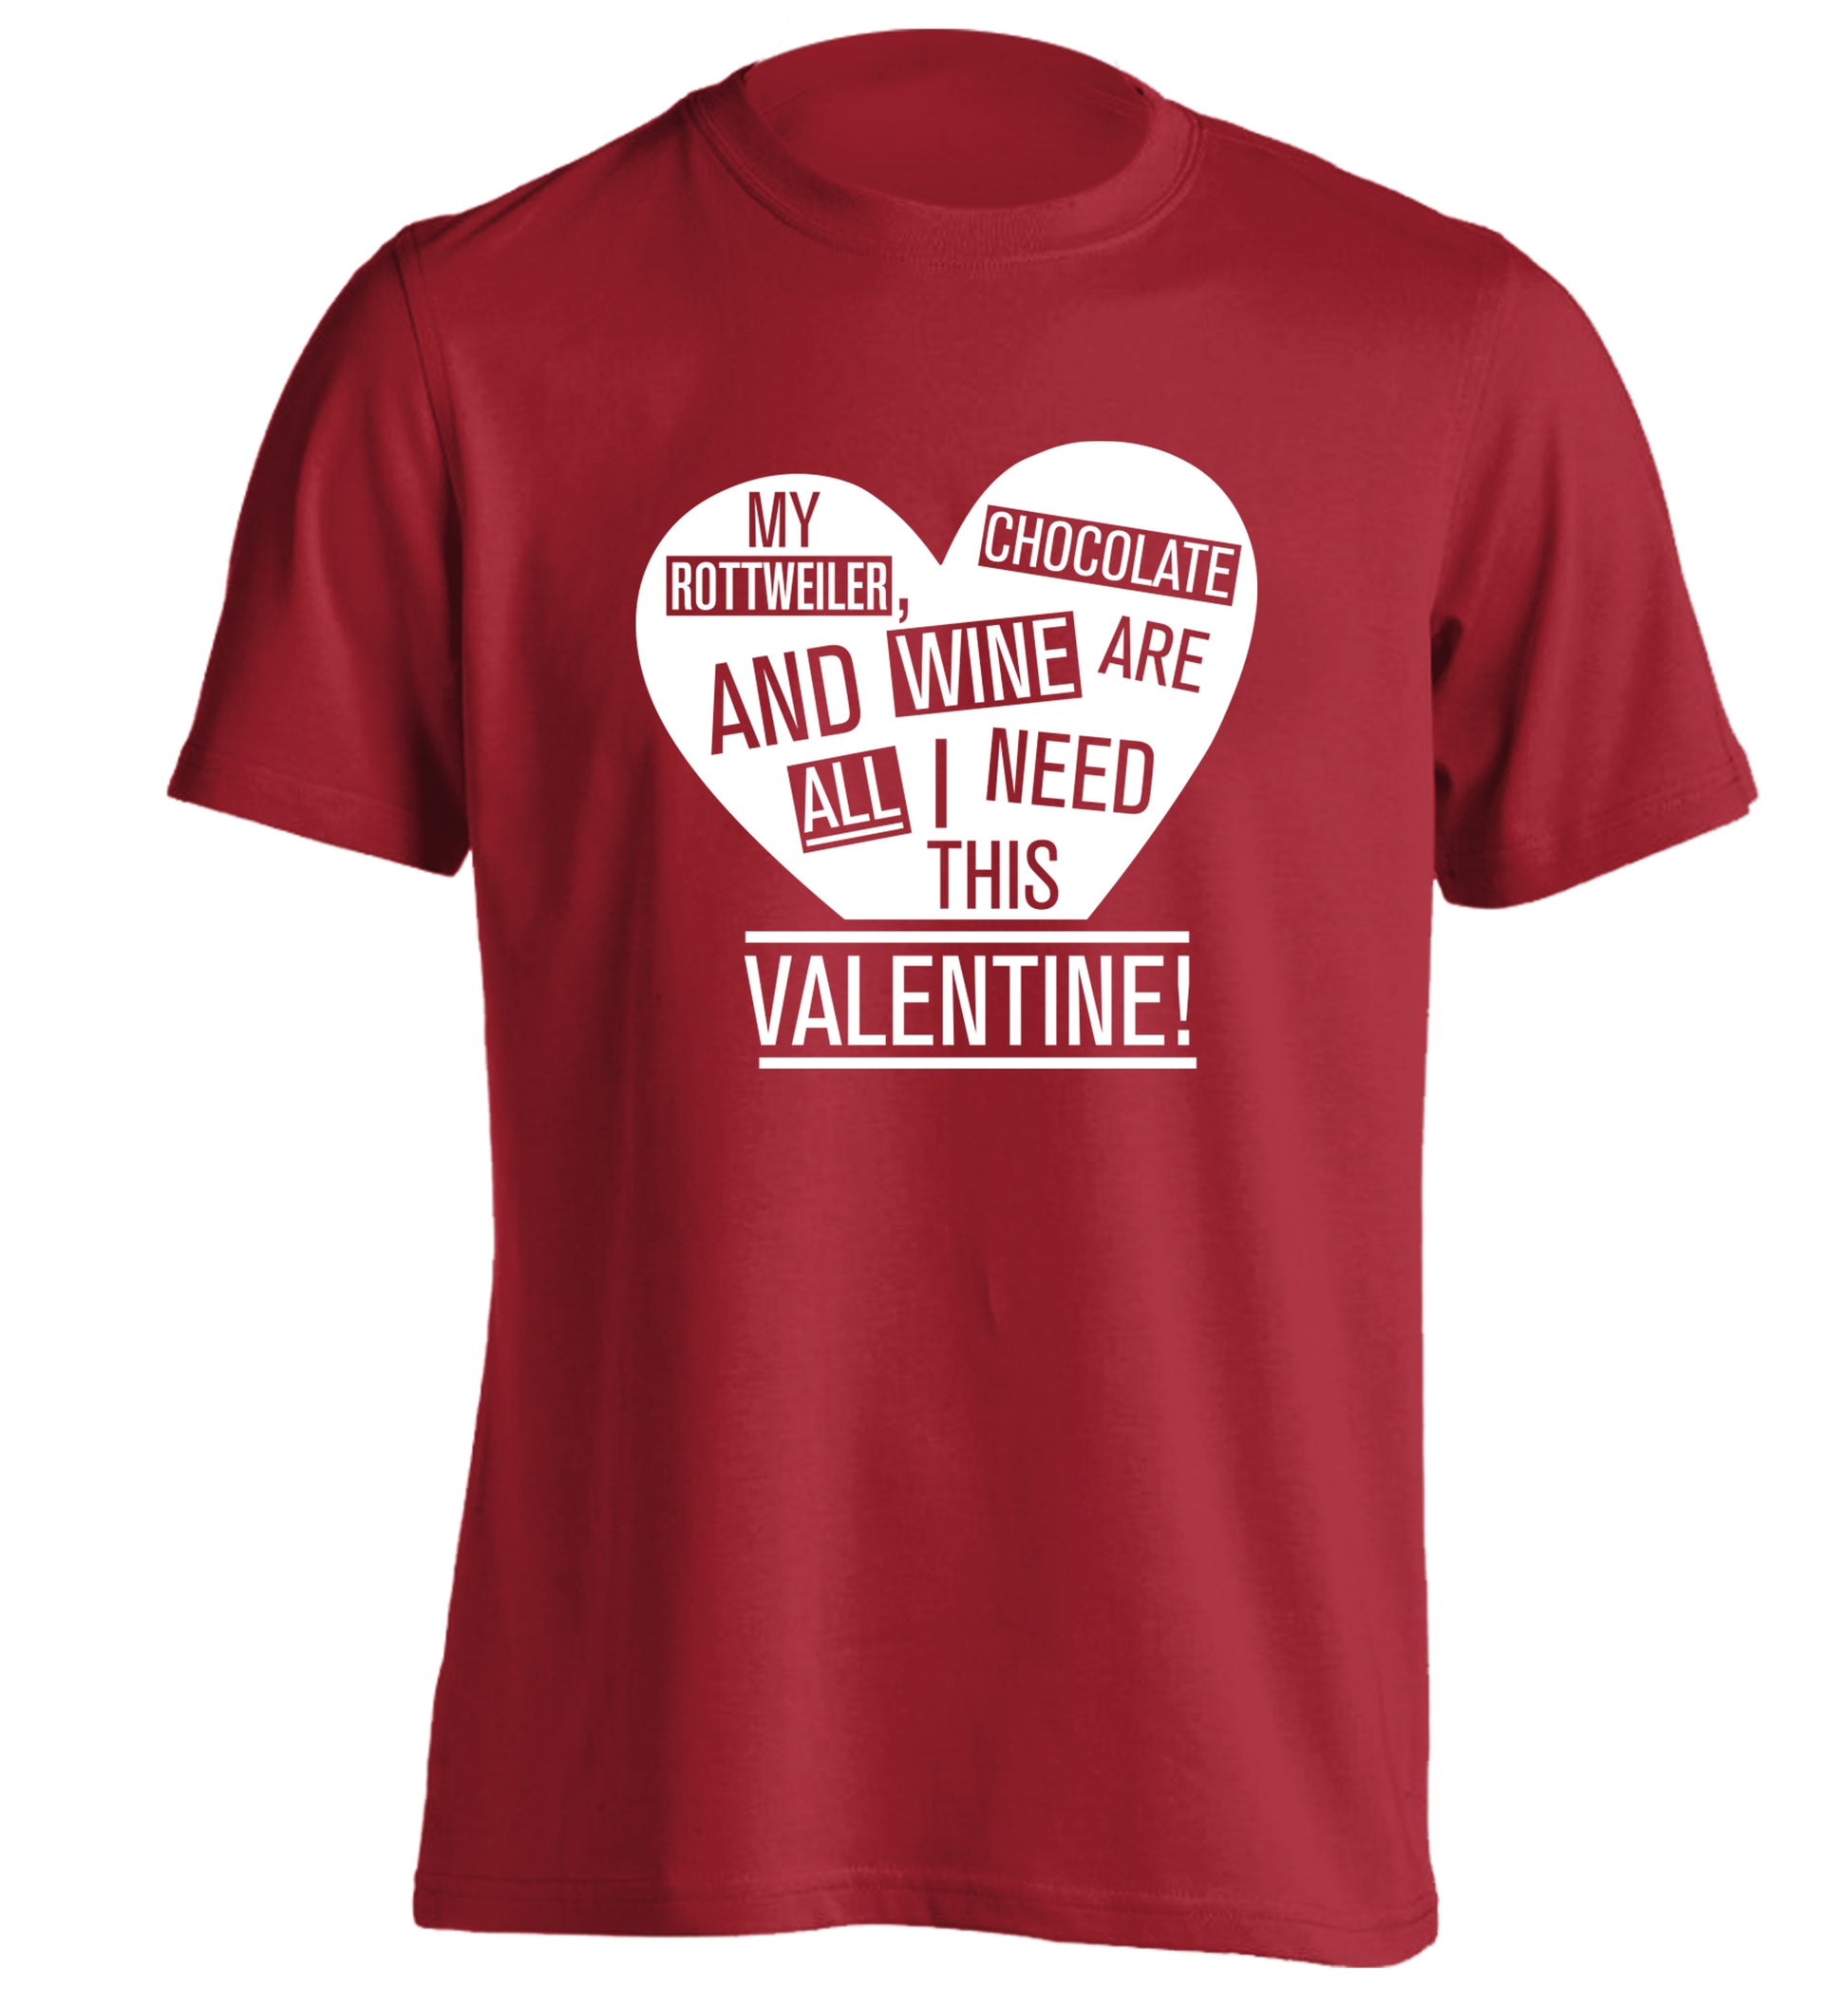 My rottweiler, chocolate and wine are all I need this valentine! adults unisex red Tshirt 2XL